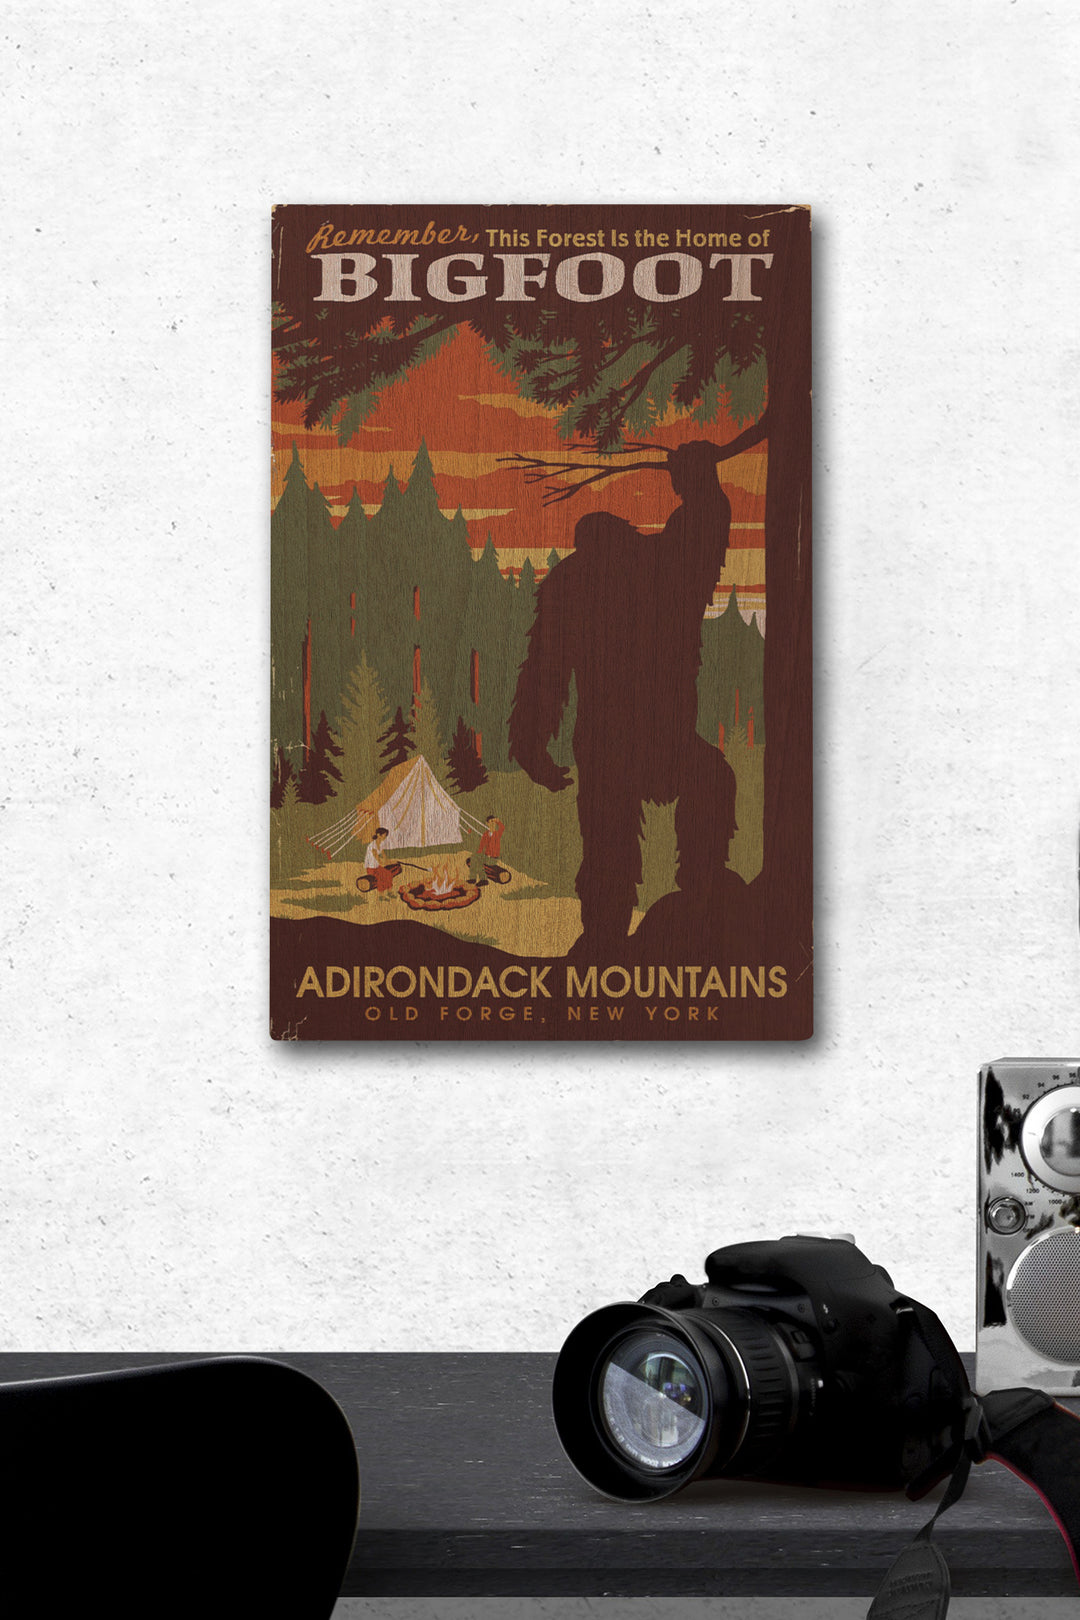 Old Forge, New York, Adirondack Mountains, Home of Bigfoot, Lantern Press Artwork, Wood Signs and Postcards